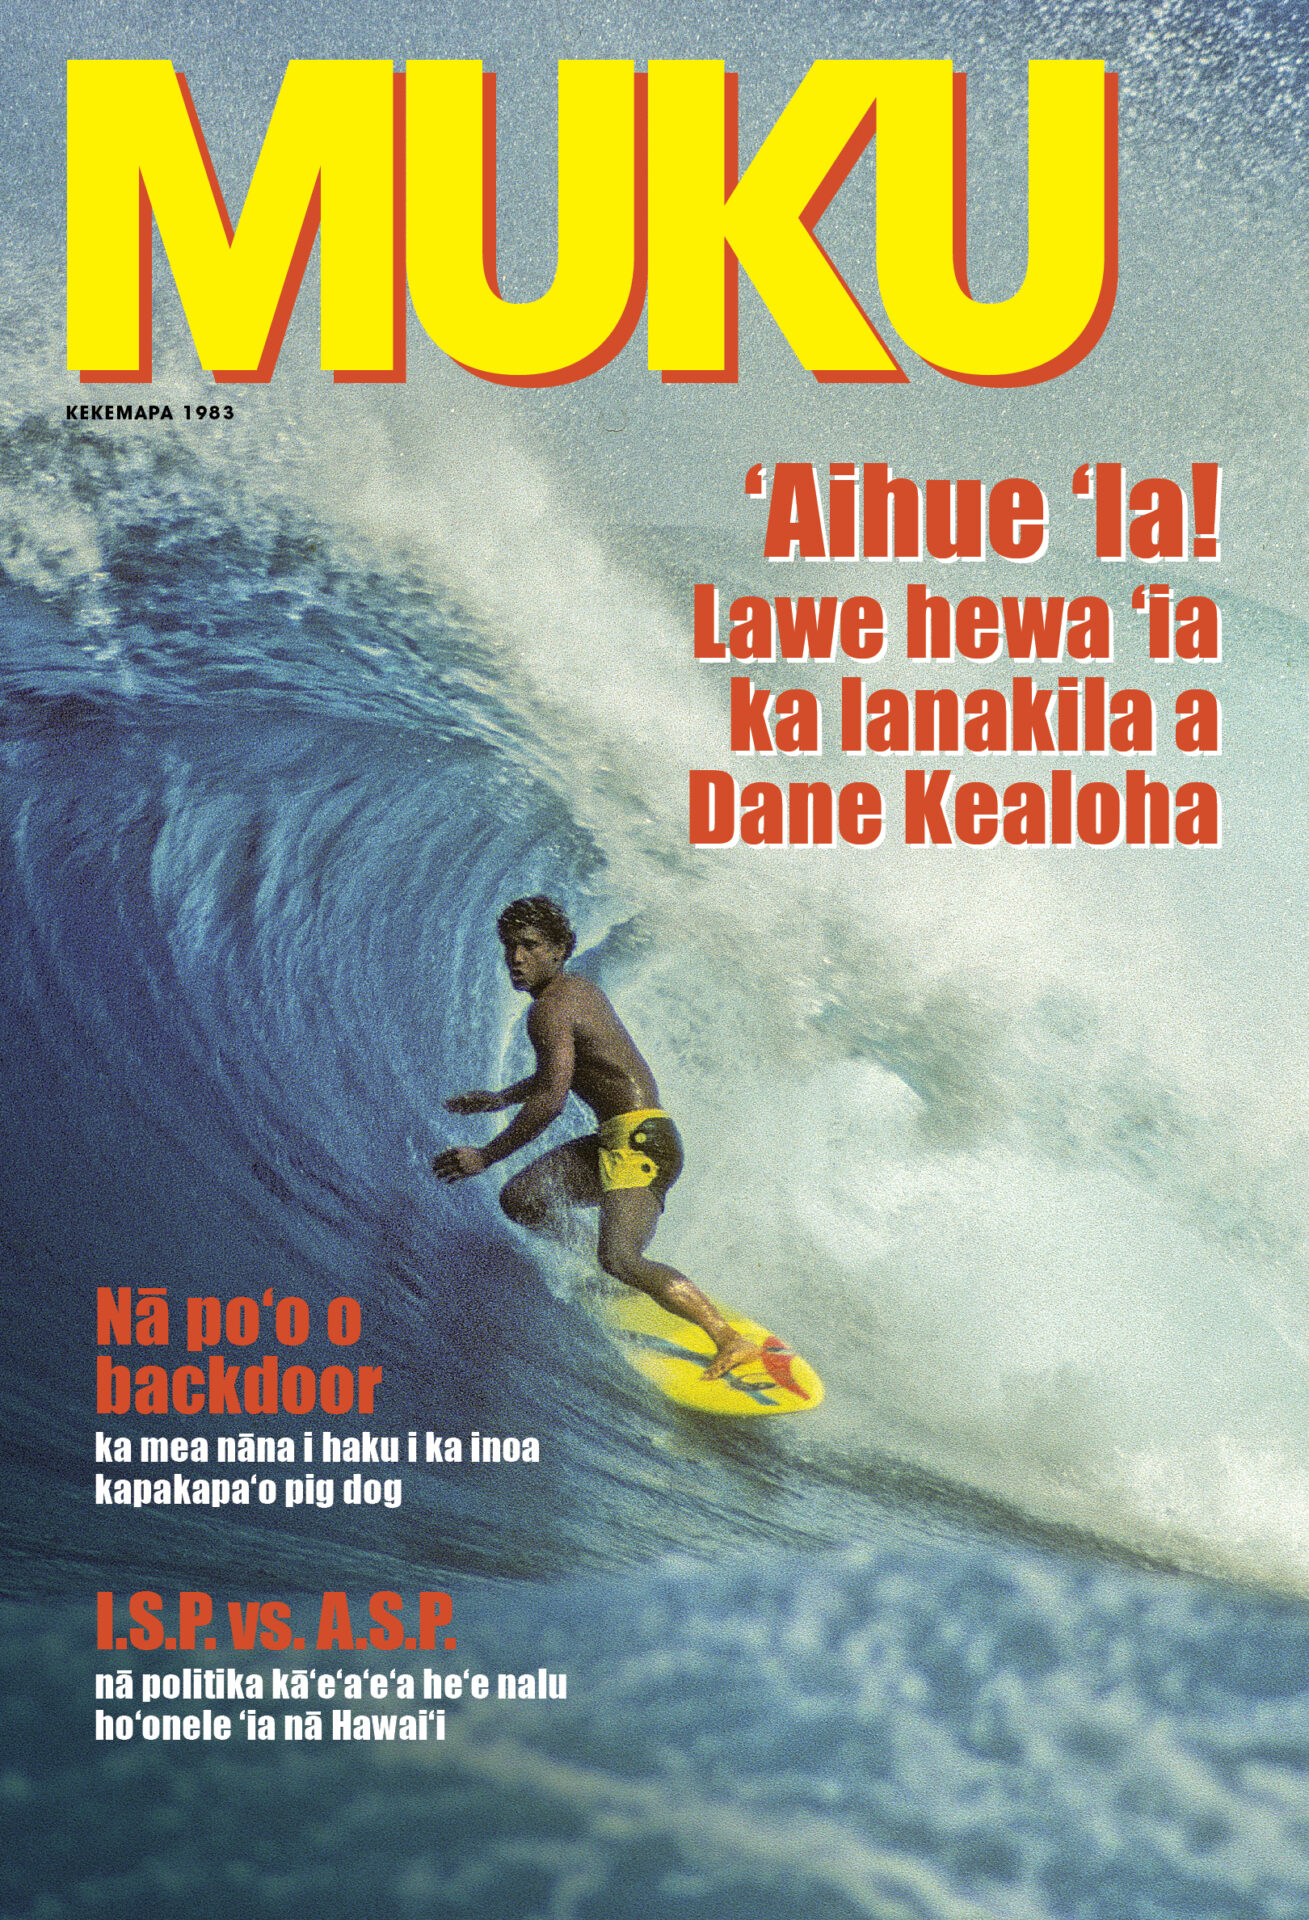 A man on a surfboard riding a wave on the cover of a magazine.